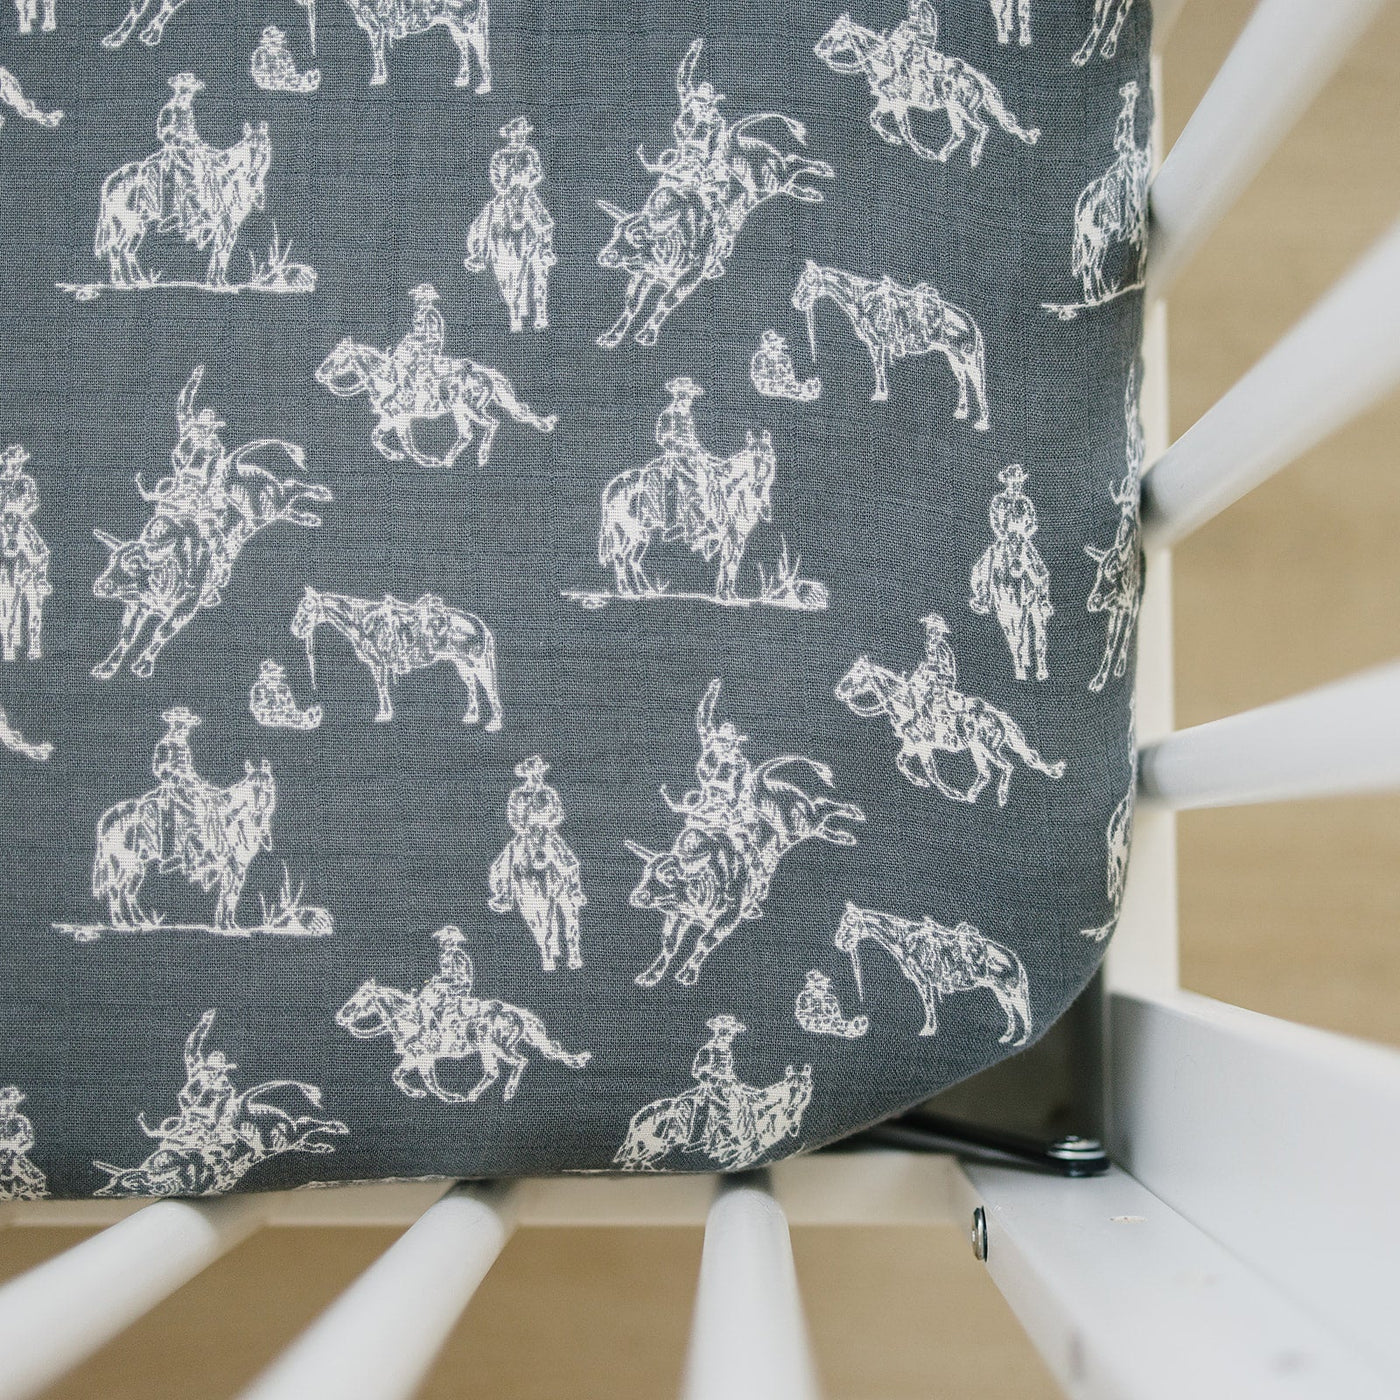 a crib with a grey fabric with horses on it